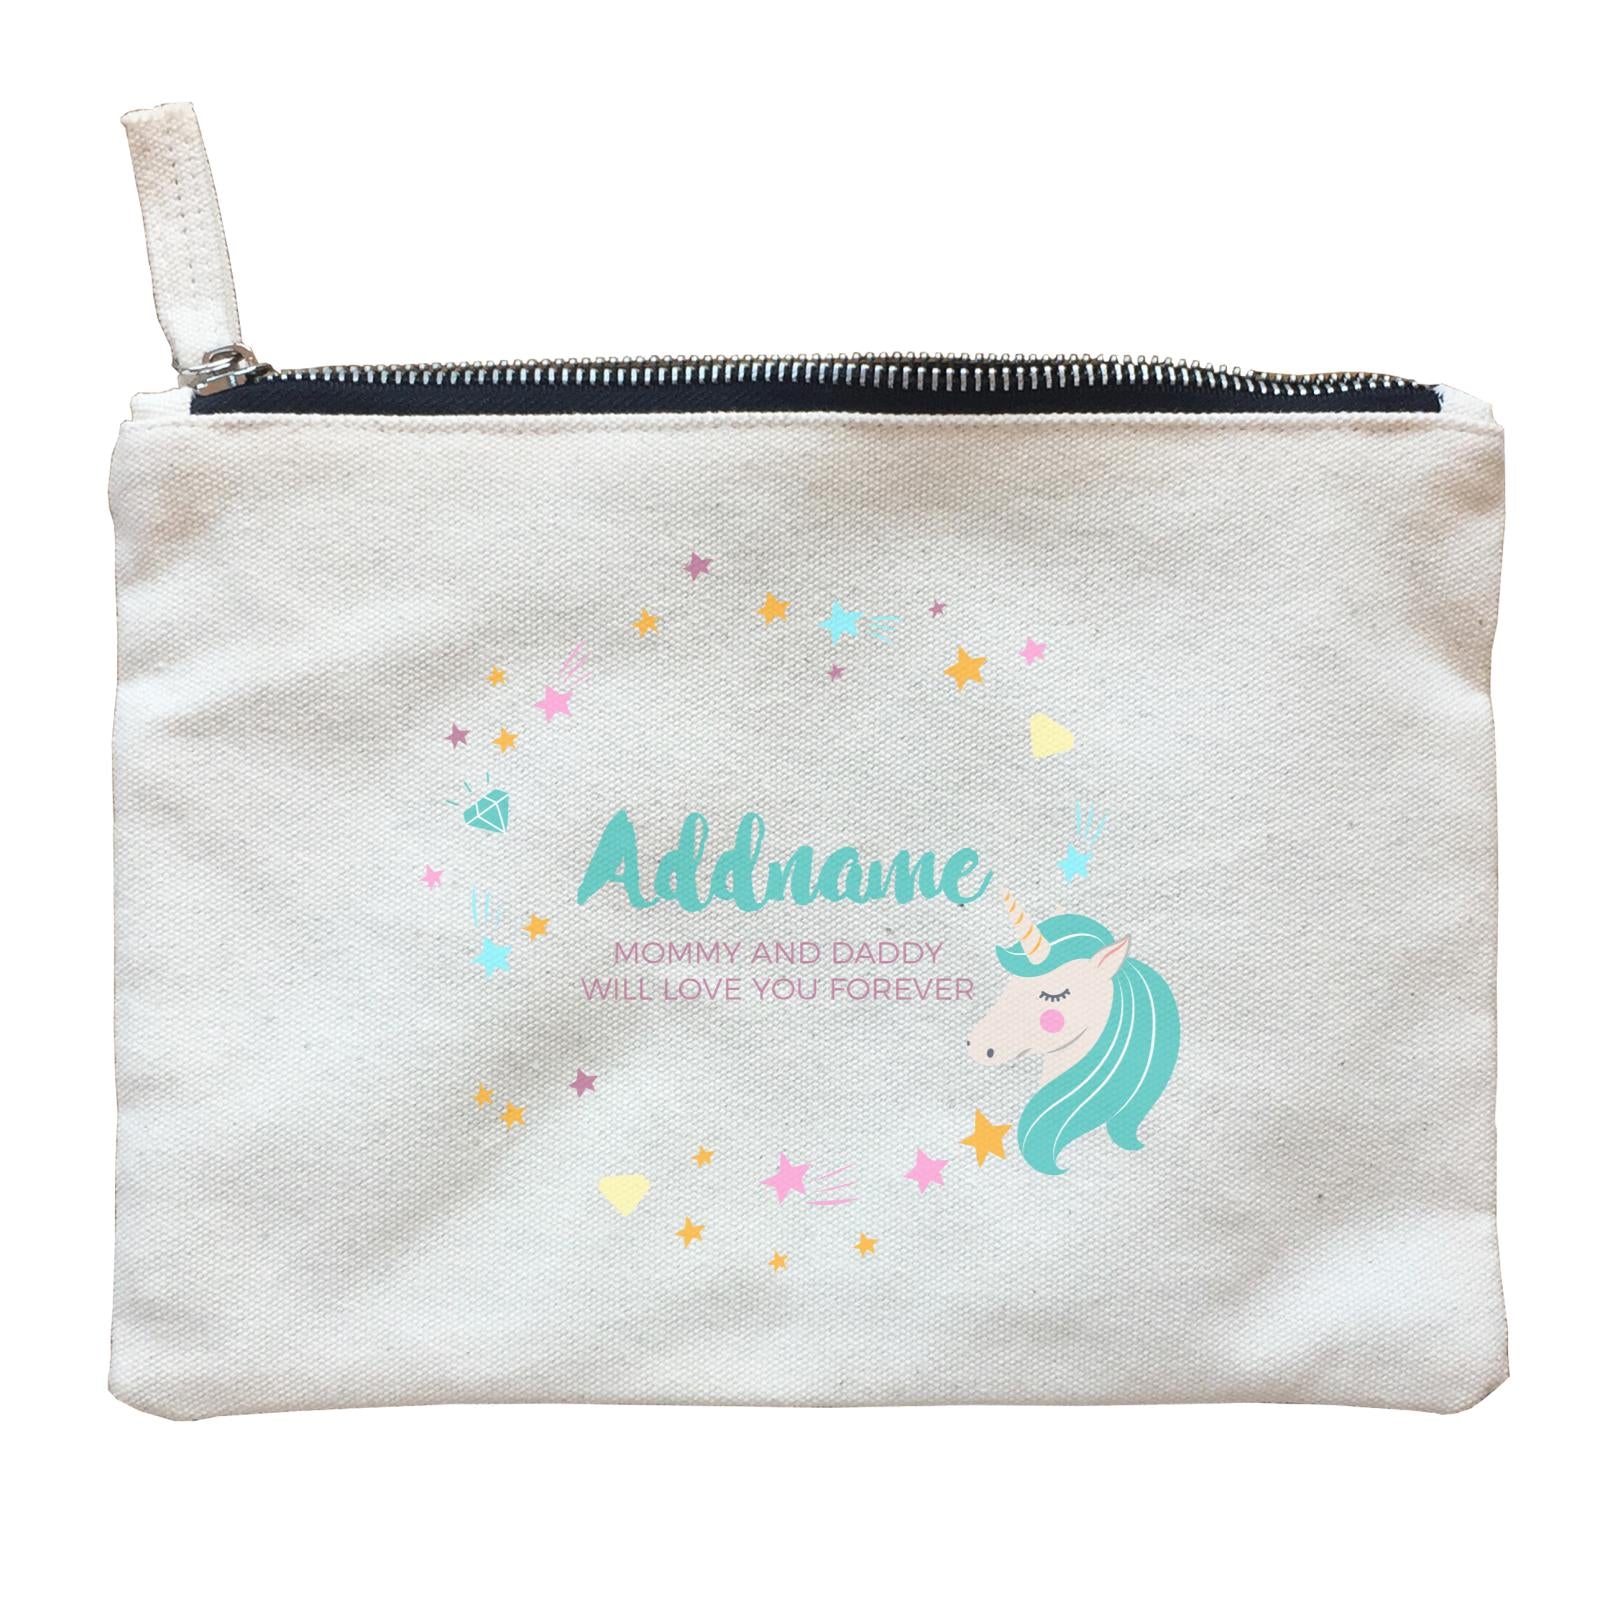 Cute Green Unicorn with Star and Diamond Elements Personalizable with Name and Date Zipper Pouch